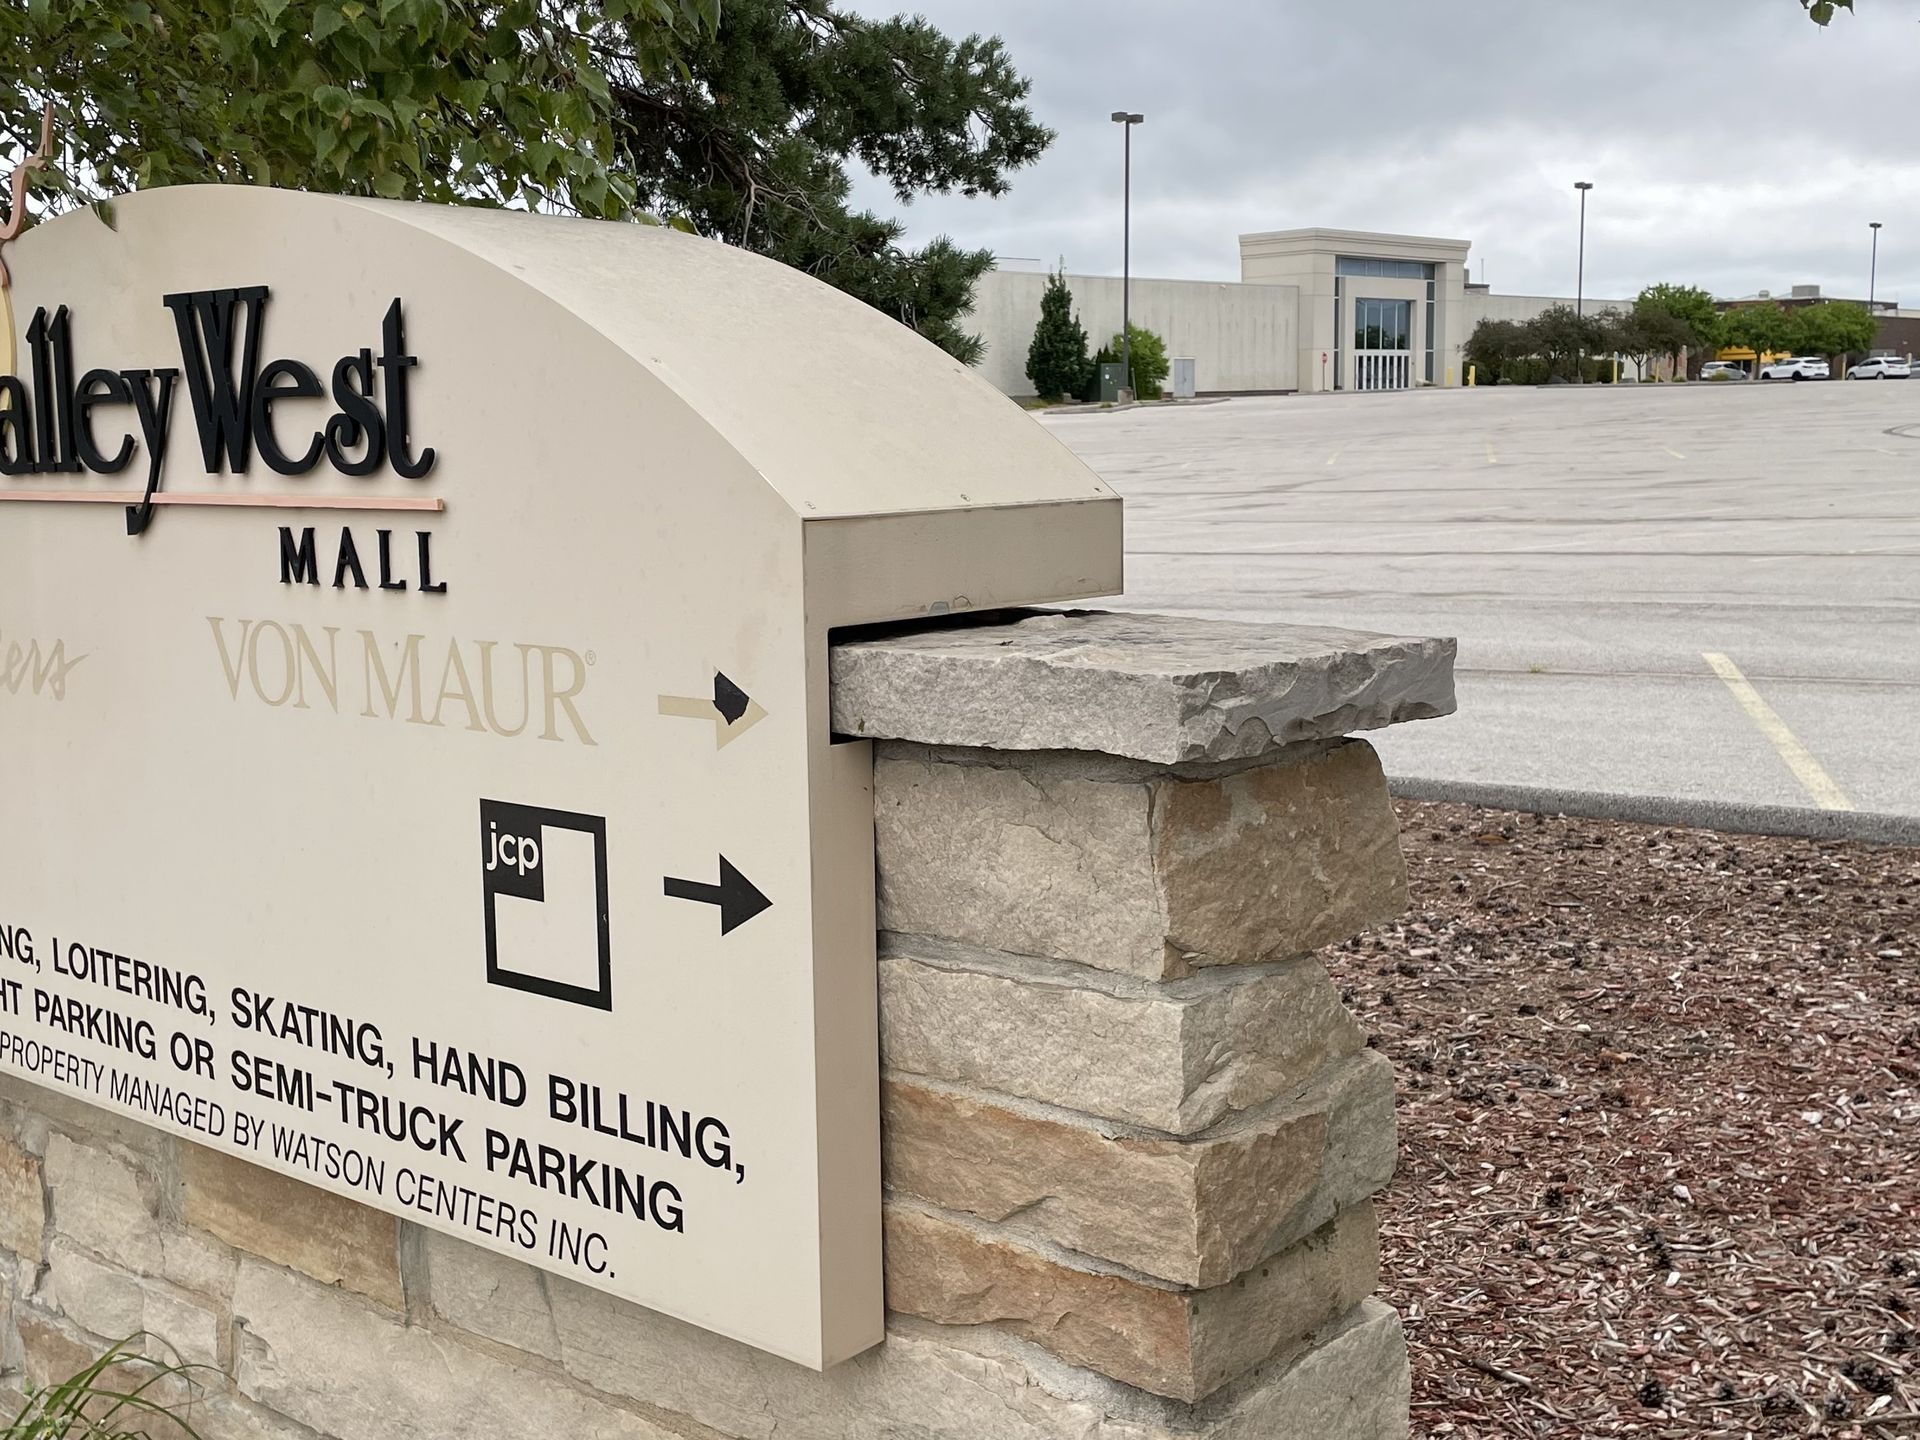 Report: Von Maur closing Valley West Mall location, moving to